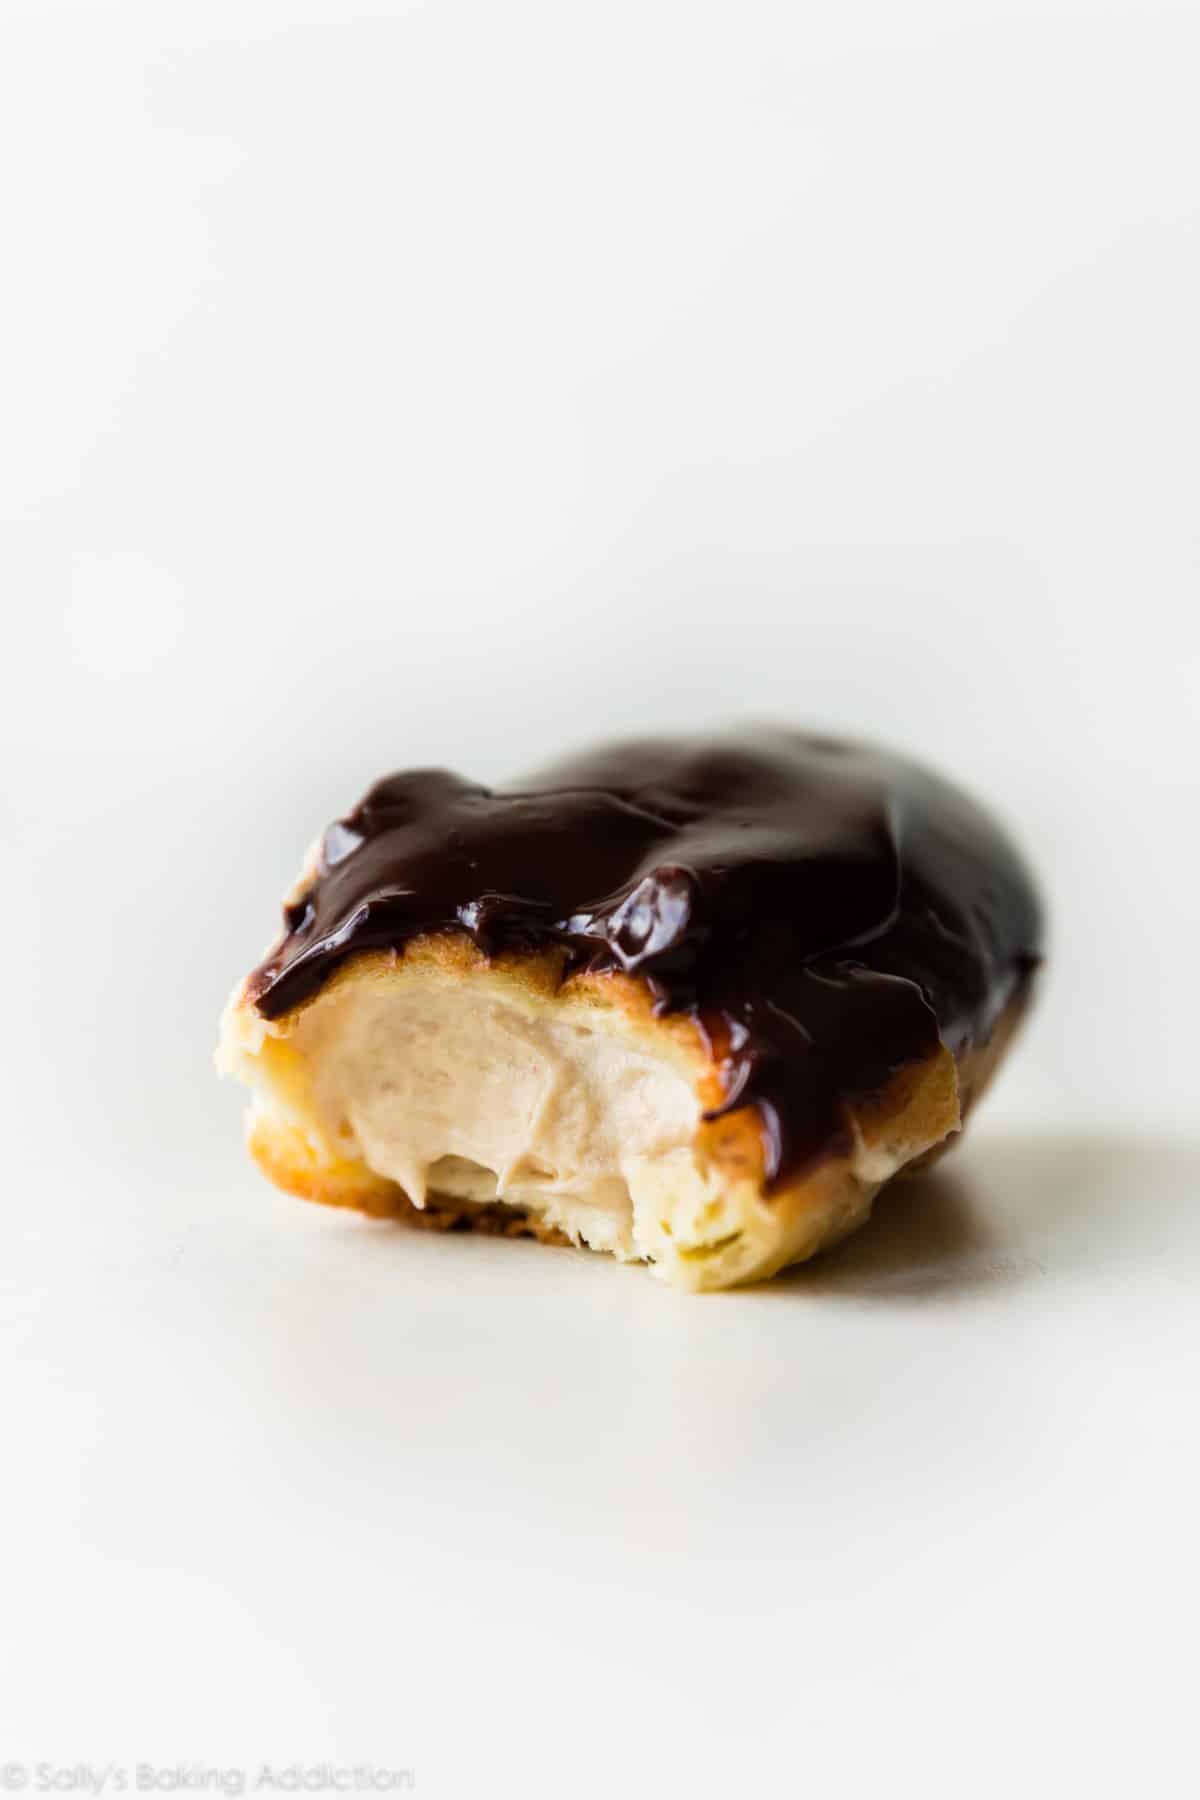 eclair with peanut butter mousse filling and topped with chocolate ganache